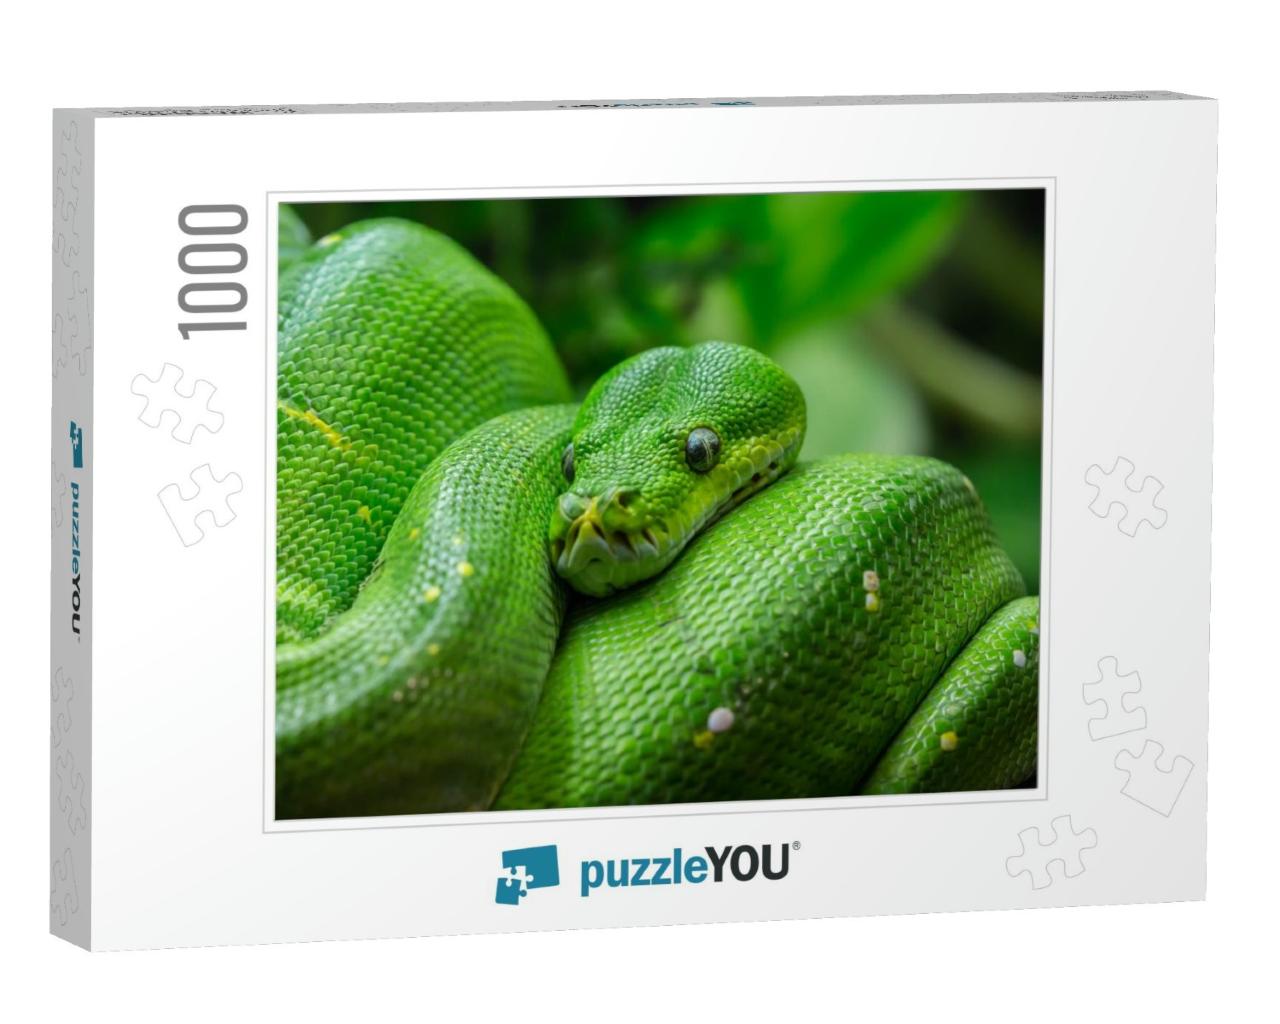 Close-Up View of a Green Tree Python Morelia Viridis... Jigsaw Puzzle with 1000 pieces